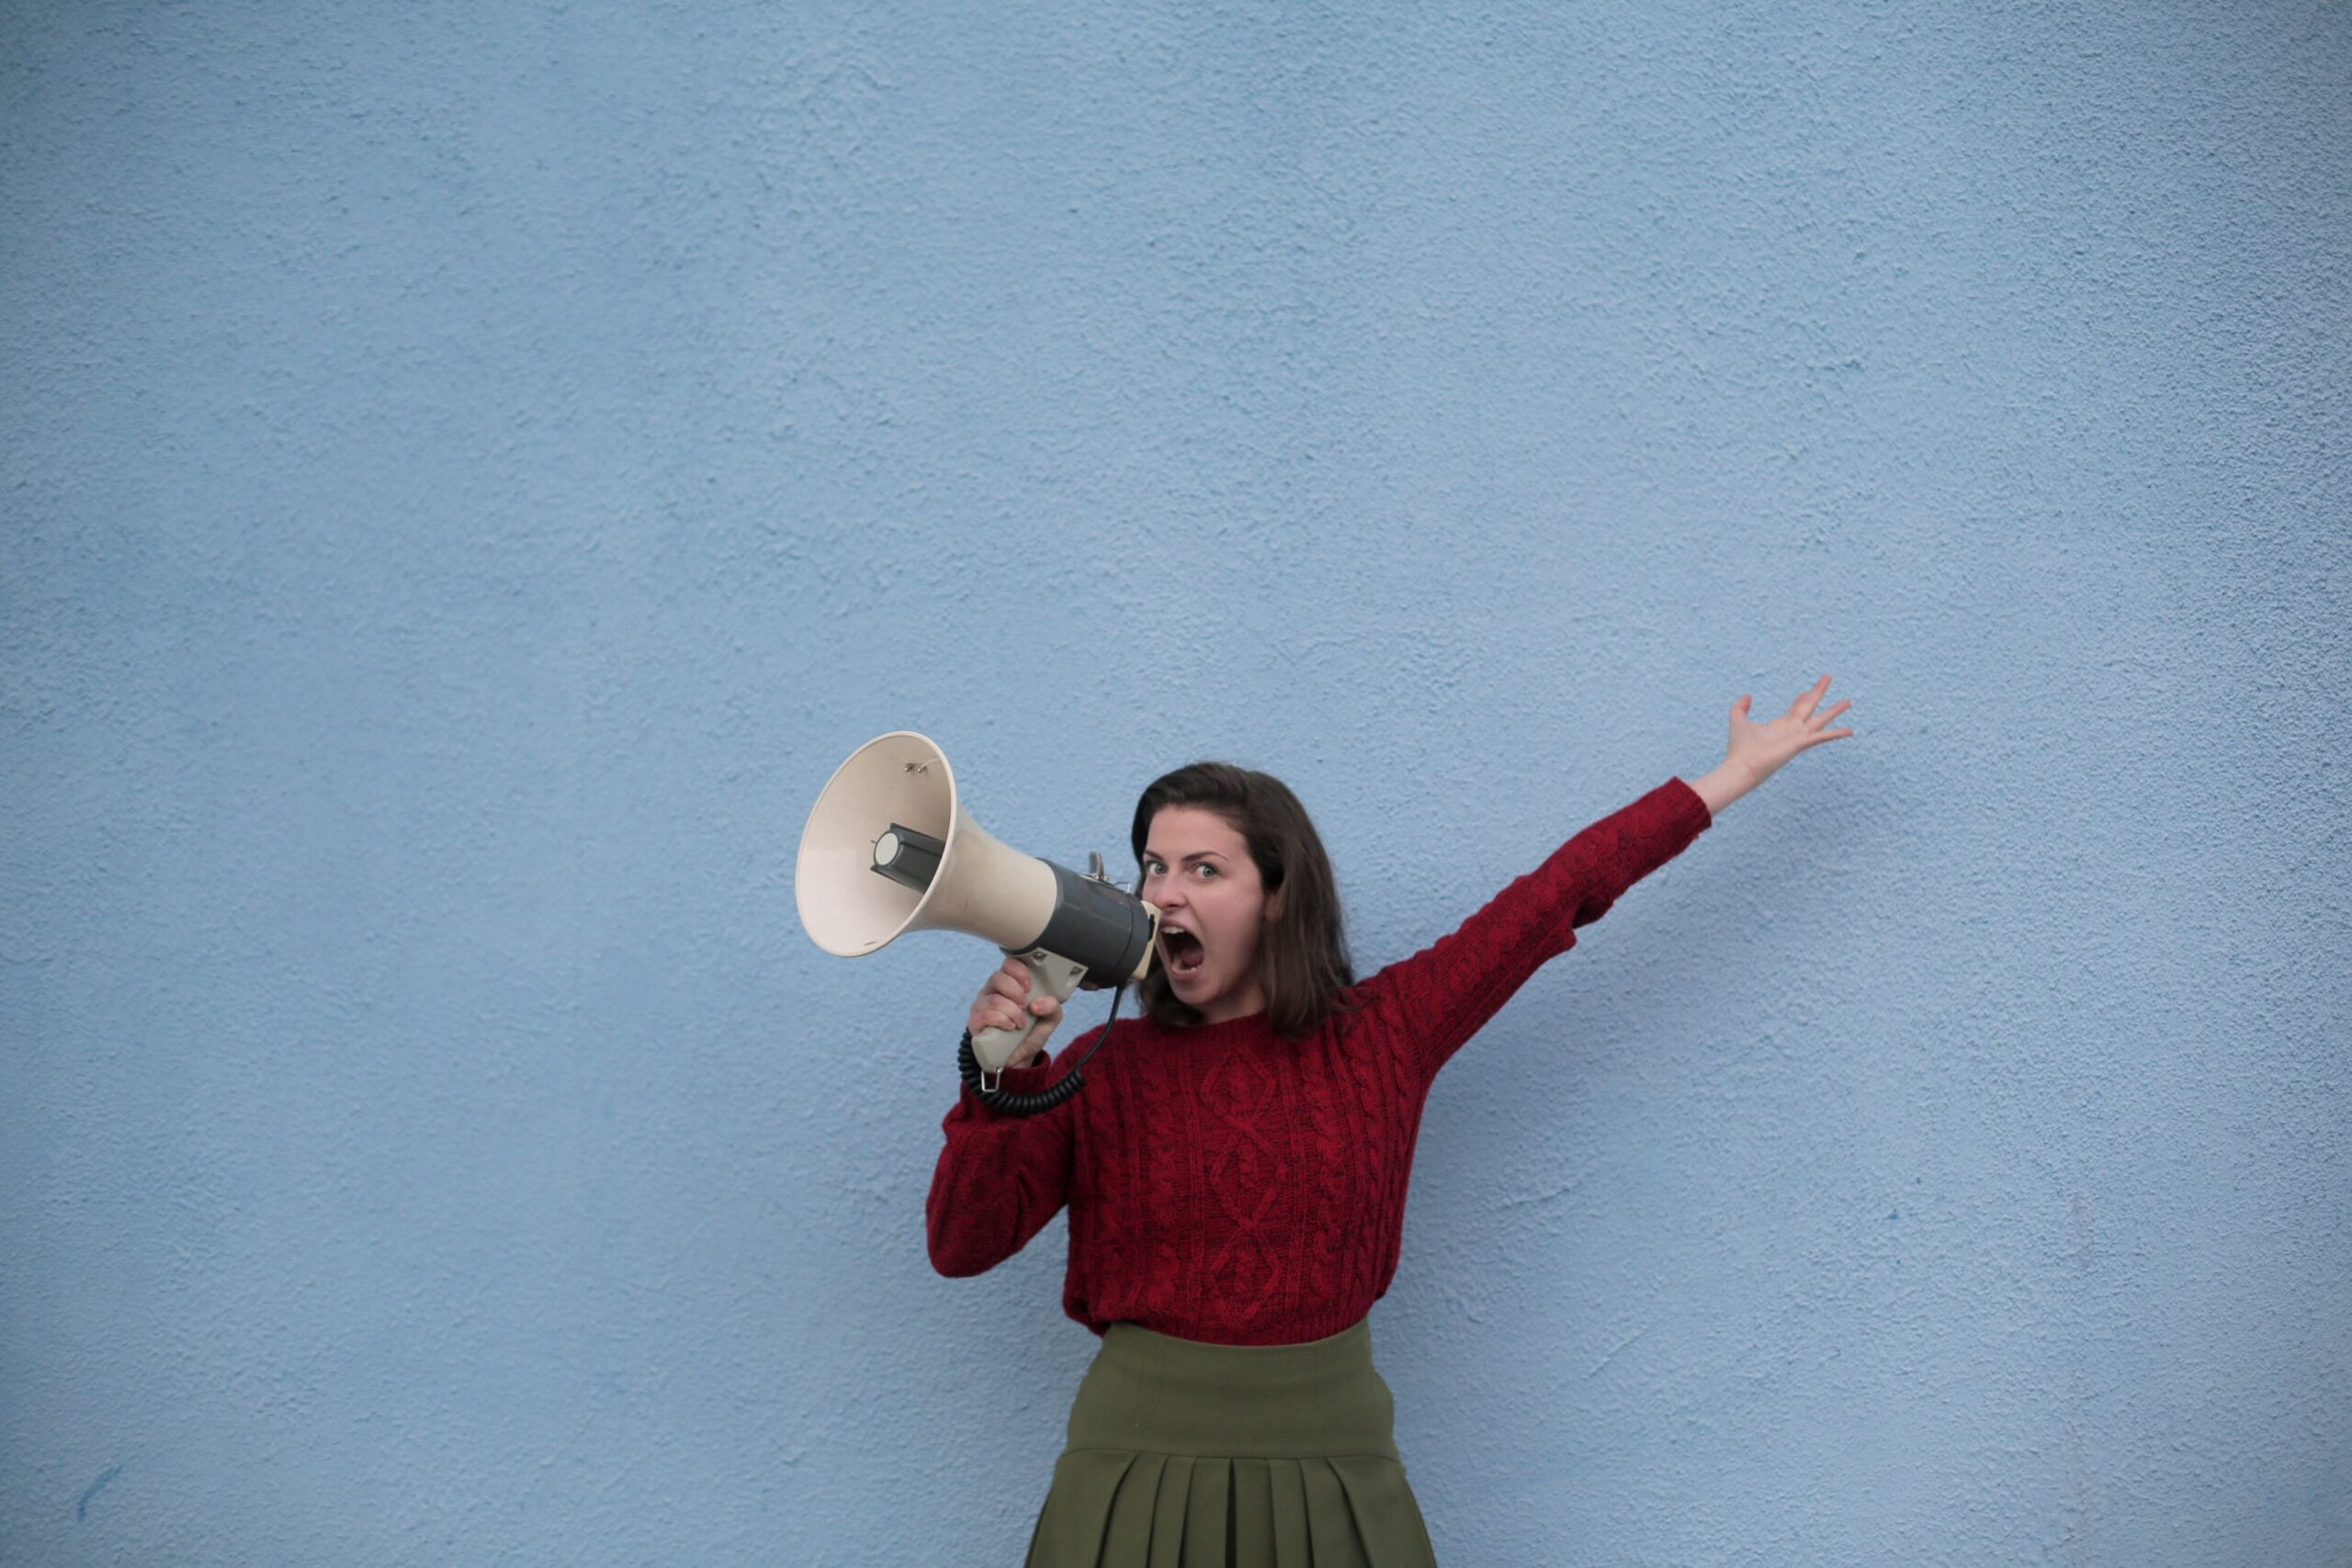 Woman shouting into her megaphone, looking at the camera in front of a muddy-blue wall, her left hand raised above her head. She's wearing a green skirt and a red jumper and she has a very intense look on her face, with her brown hair cut at her shoulders. This image was repurposed to represent using the correct voice and tone.